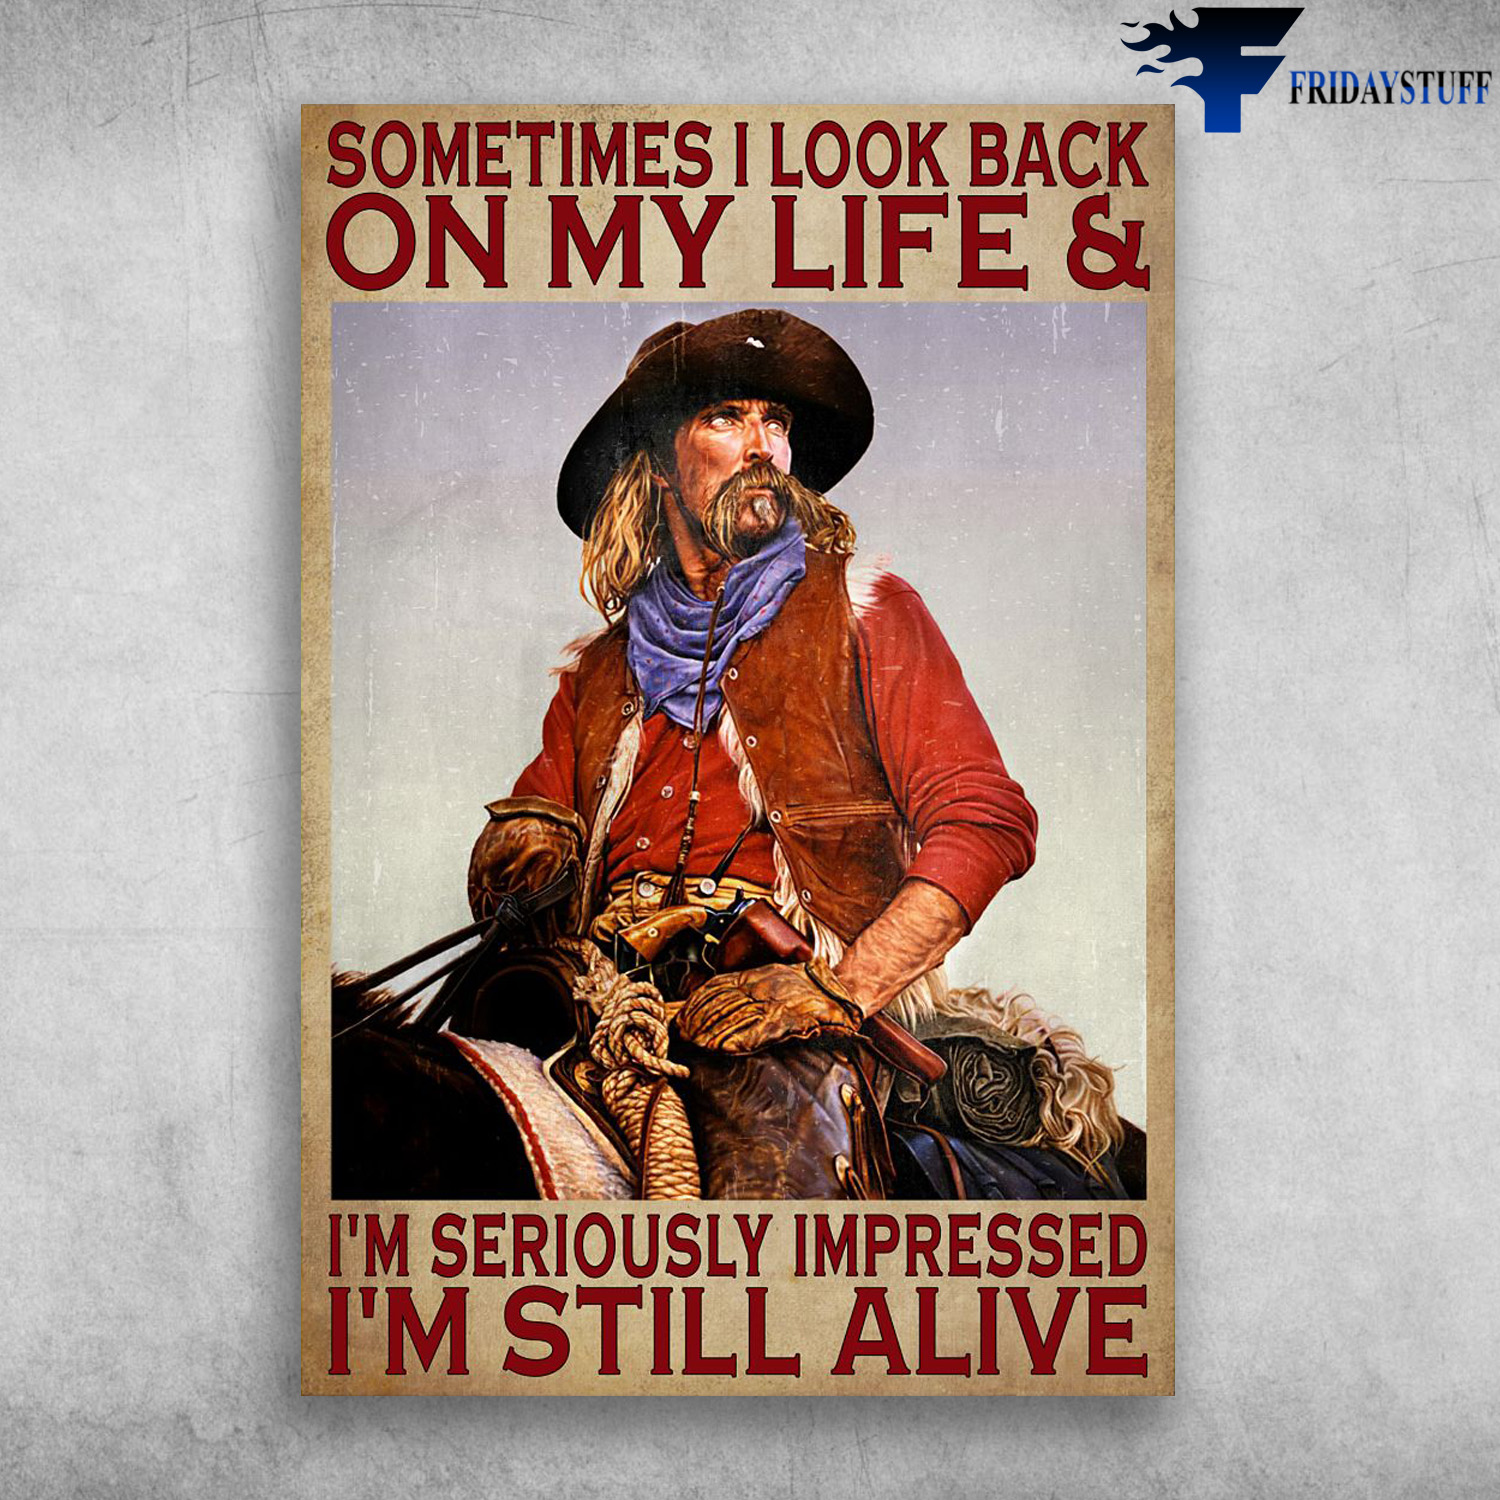 Cowboy Riding Horse - Sometimes I Look Back, On My Life And, I'm Seriously Im Pressed, I'm Still Alive